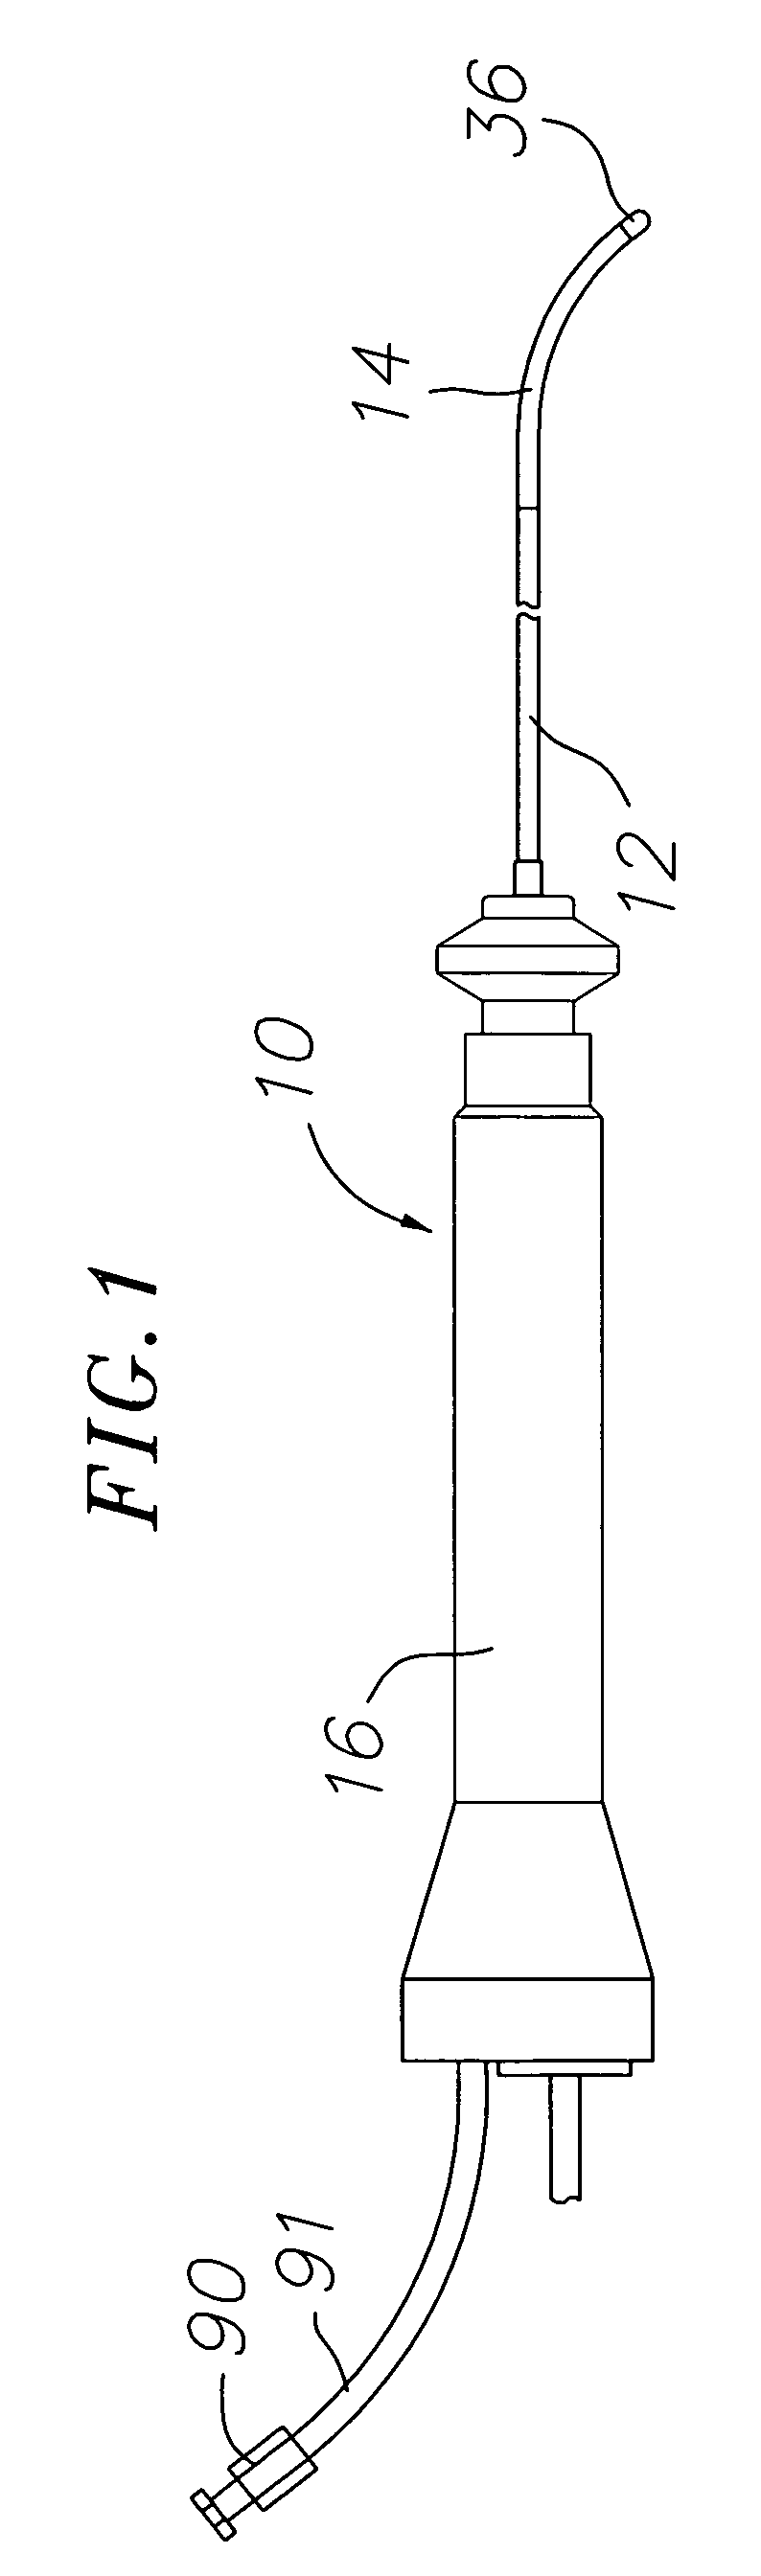 Catheter with multi port tip for optical lesion evaluation